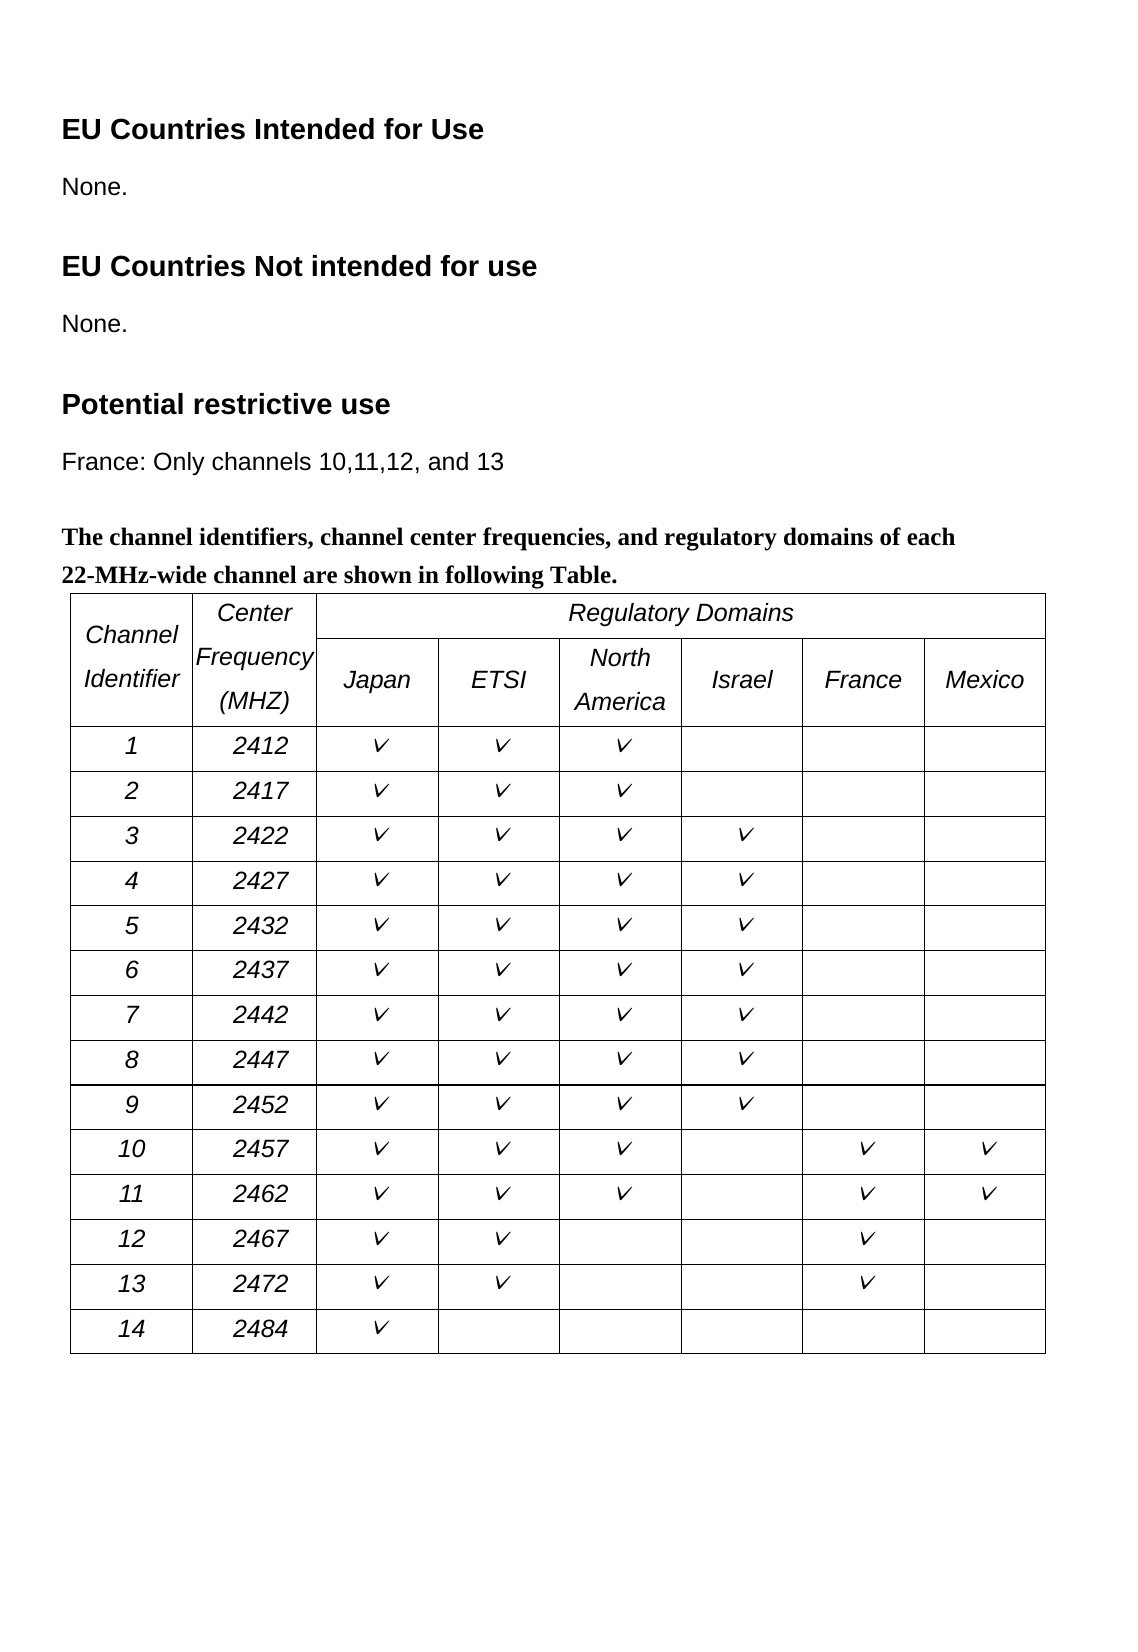    EU Countries Intended for Use   None. EU Countries Not intended for use   None. Potential restrictive use France: Only channels 10,11,12, and 13   The channel identifiers, channel center frequencies, and regulatory domains of each 22-MHz-wide channel are shown in following Table. Regulatory Domains Channel Identifier Center Frequency (MHZ)  Japan ETSI North America Israel France Mexico 1 2412 ˇ ˇ ˇ    2 2417 ˇ ˇ ˇ    3 2422 ˇ ˇ ˇ ˇ   4 2427 ˇ ˇ ˇ ˇ   5 2432 ˇ ˇ ˇ ˇ   6 2437 ˇ ˇ ˇ ˇ   7 2442 ˇ ˇ ˇ ˇ   8 2447 ˇ ˇ ˇ ˇ   9 2452 ˇ ˇ ˇ ˇ   10 2457 ˇ ˇ ˇ  ˇ ˇ 11 2462 ˇ ˇ ˇ  ˇ ˇ 12 2467 ˇ ˇ   ˇ  13 2472 ˇ ˇ   ˇ  14 2484 ˇ          